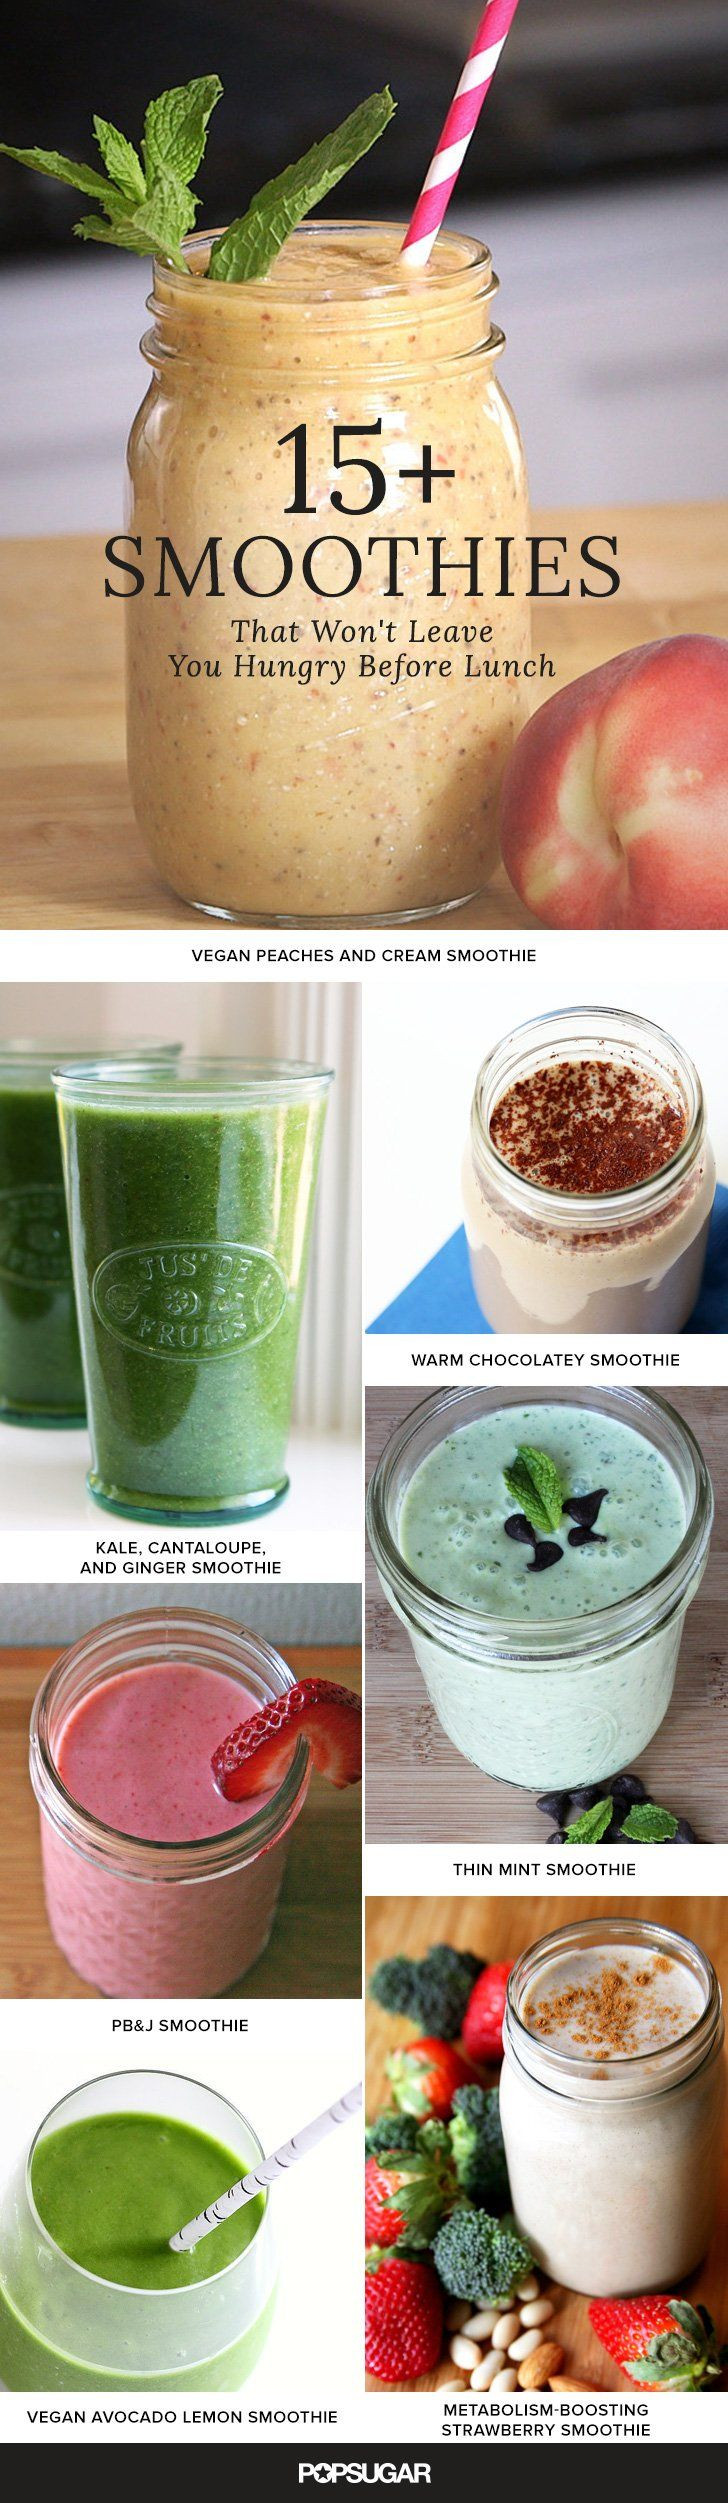 Smoothies For Breakfast
 Best 25 Breakfast smoothies ideas on Pinterest